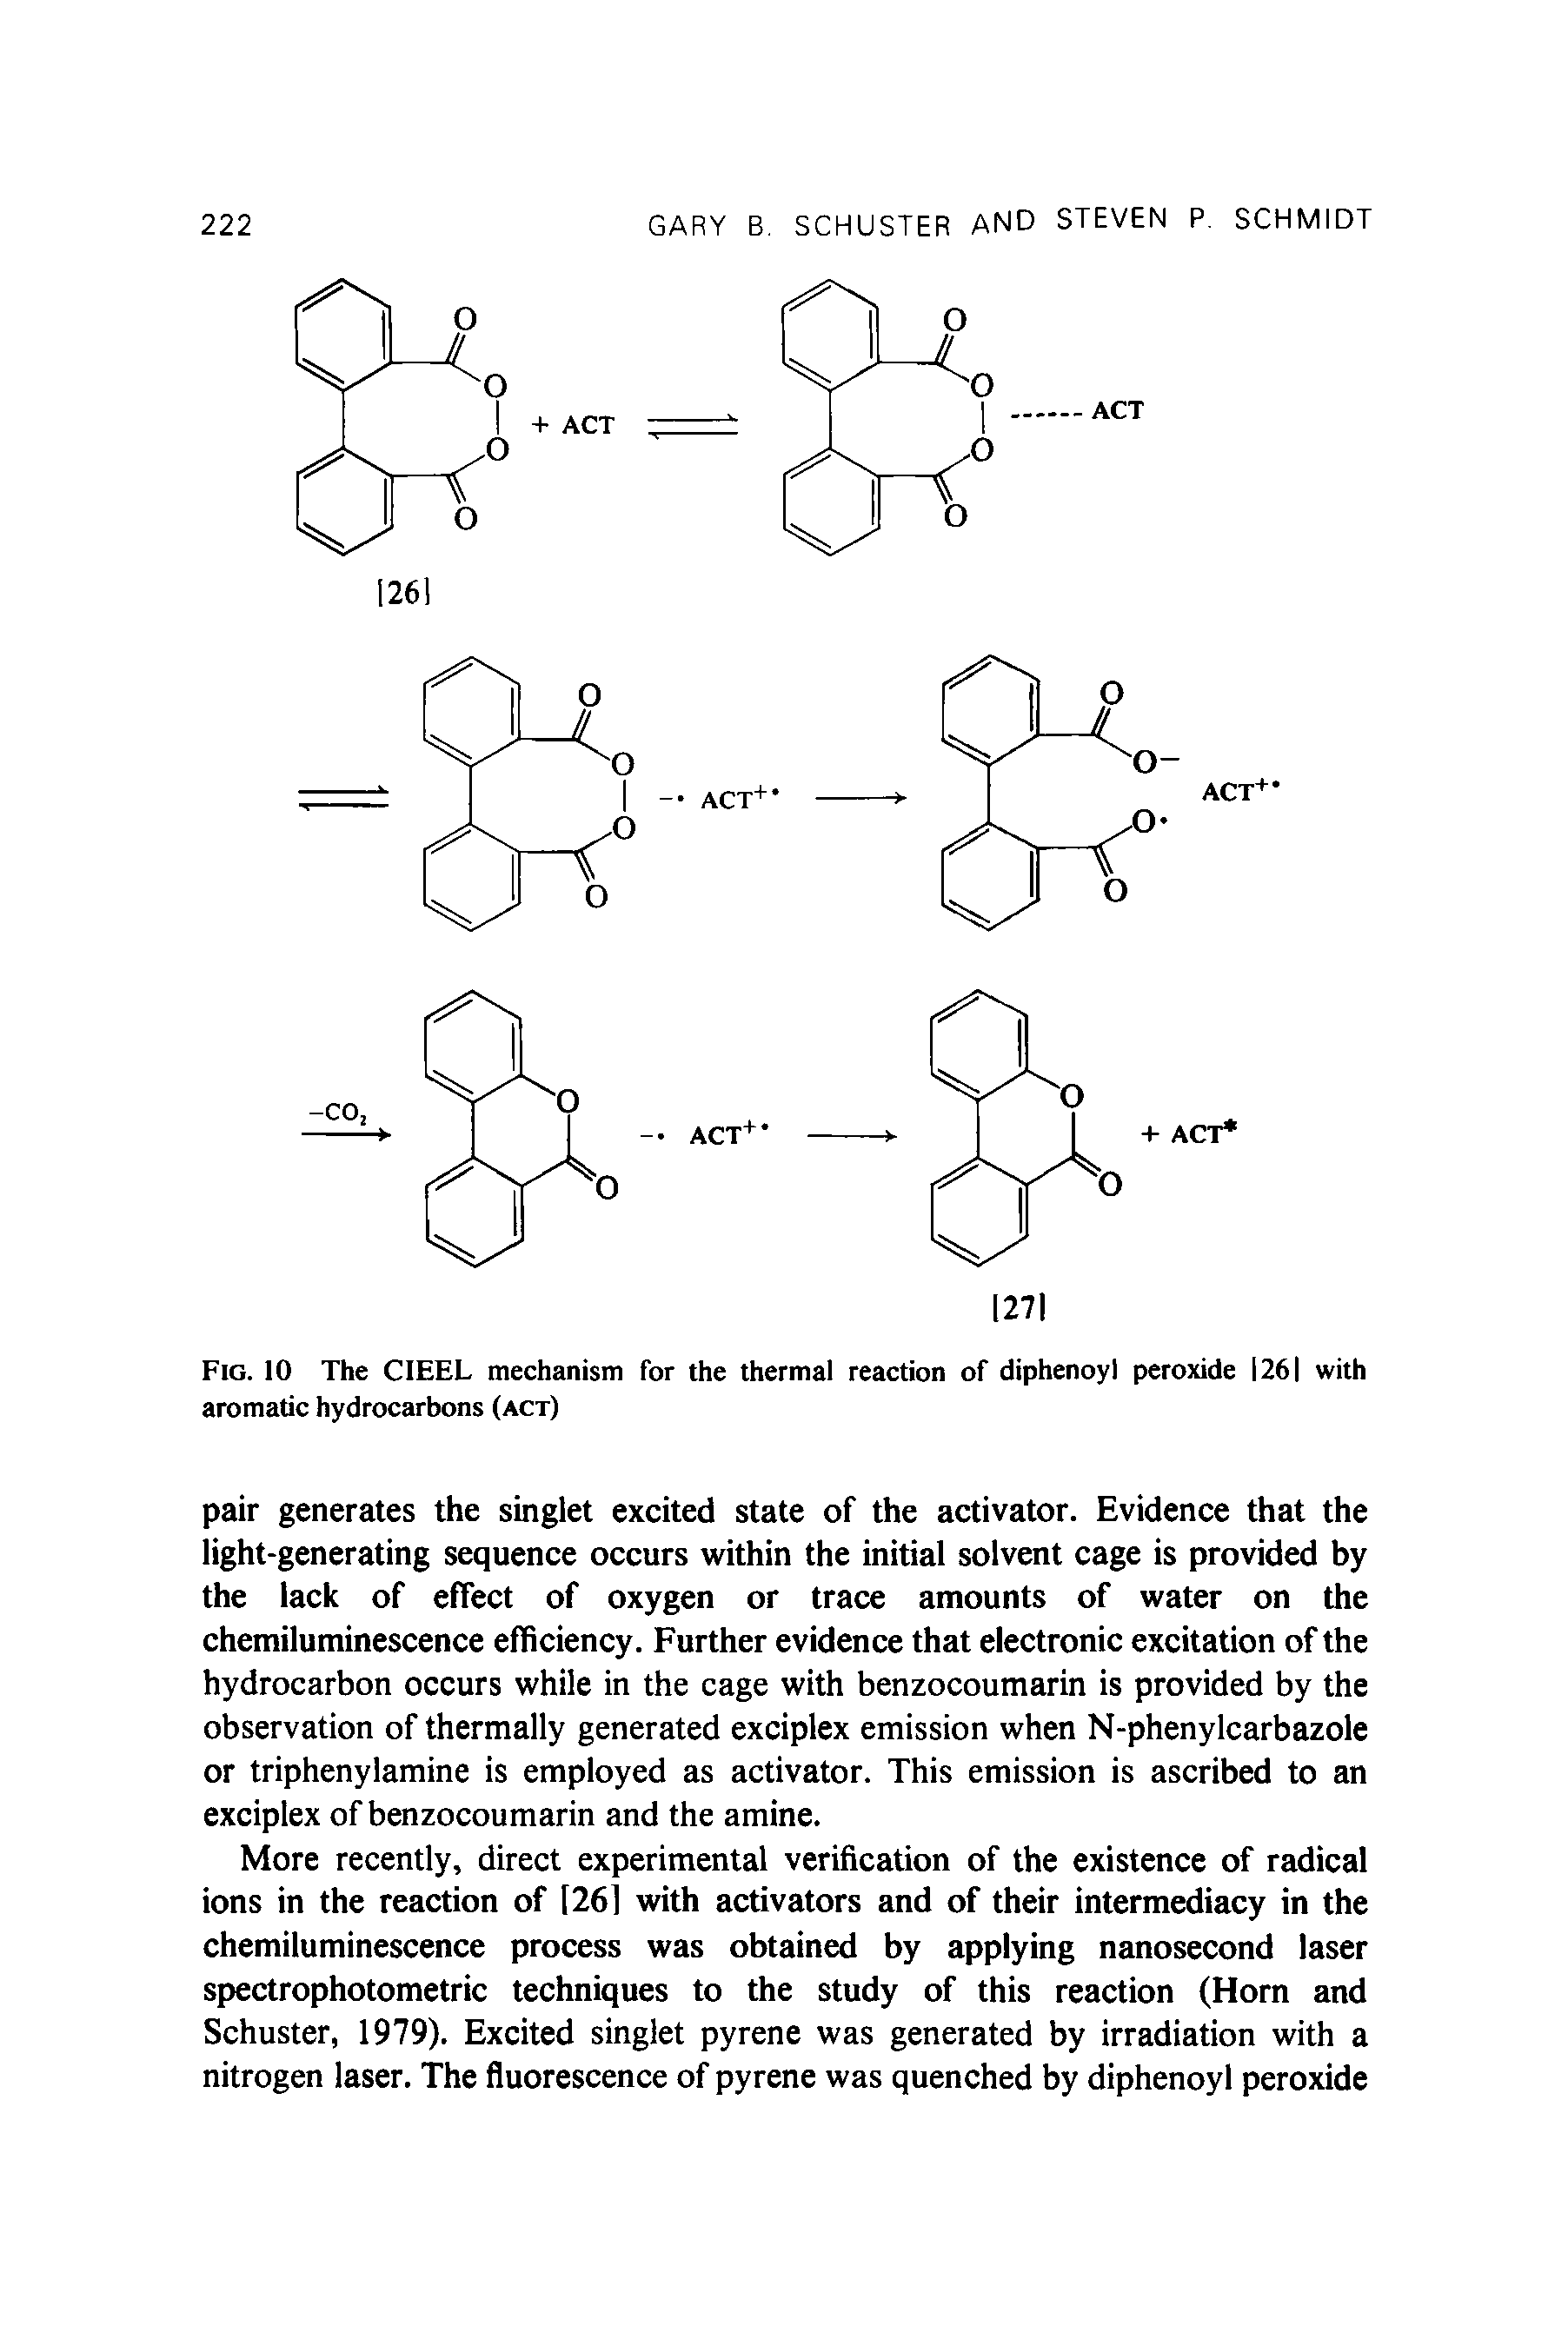 Fig. 10 The CIEEL mechanism for the thermal reaction of diphenoyl peroxide 1261 with aromatic hydrocarbons (act)...